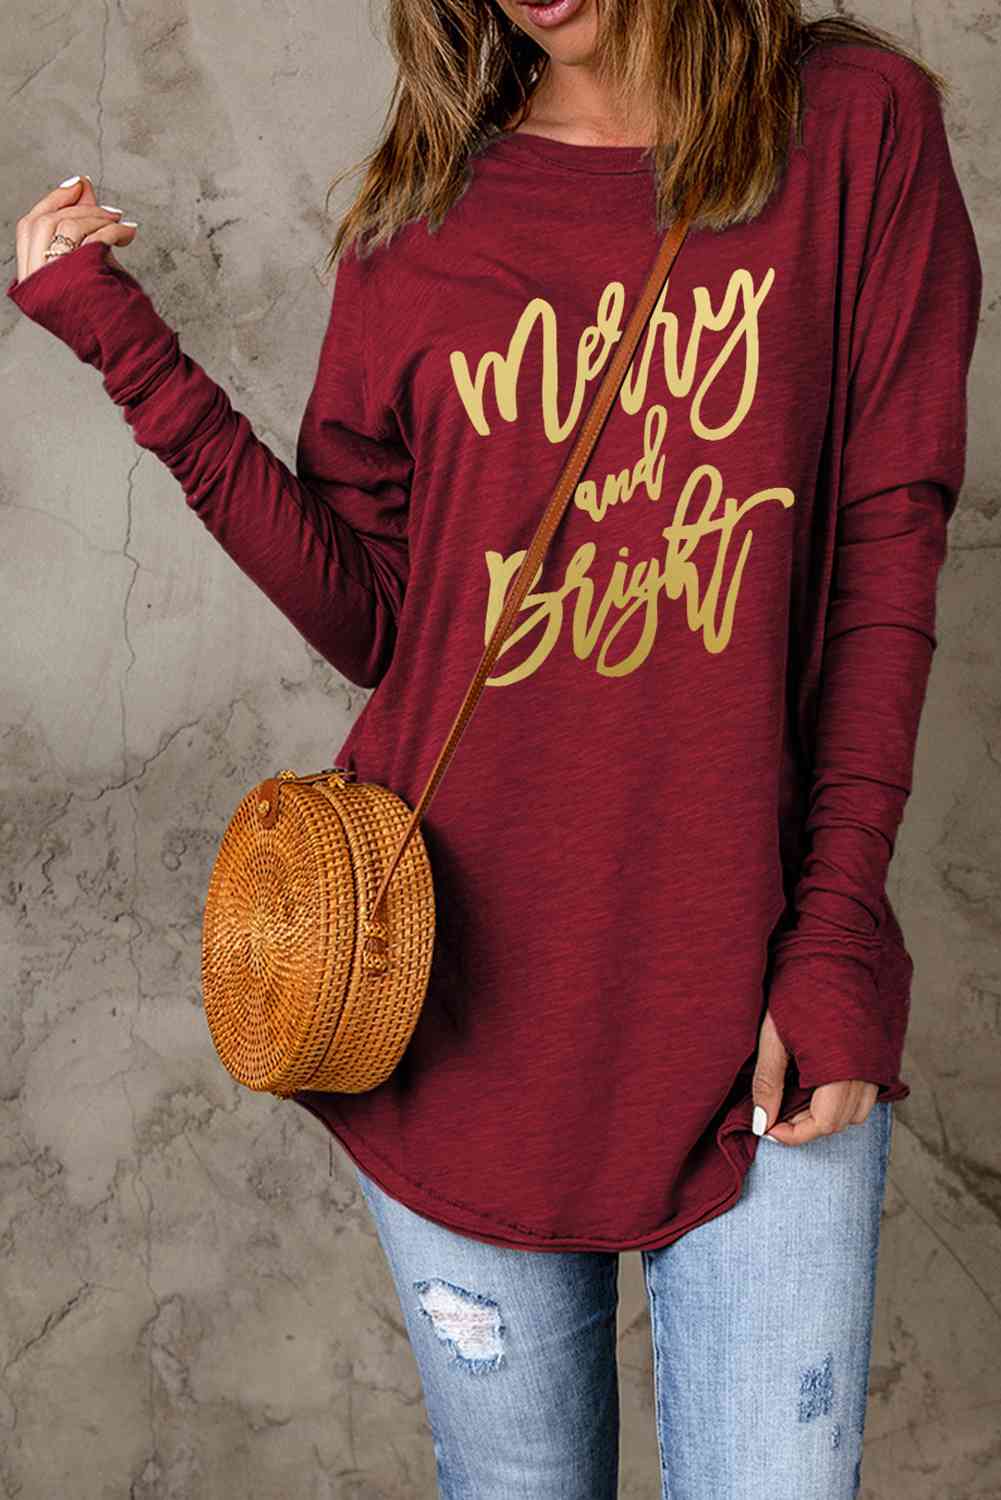 MERRY AND BRIGHT Graphic Long Sleeve T-Shirt  Krazy Heart Designs Boutique   